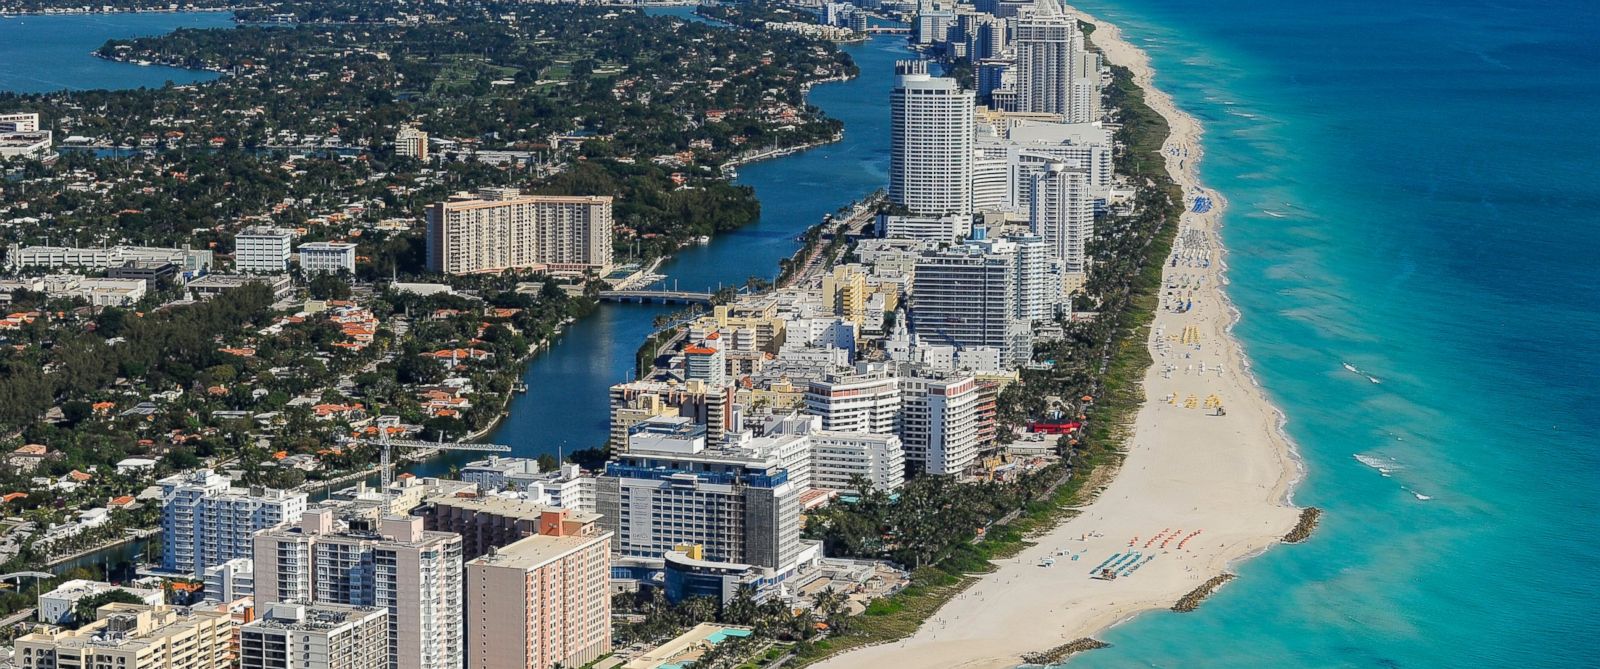 PHOTO: An aerial view of Miami Beach and South Beach from the MetLife blimp on March 8, 2014